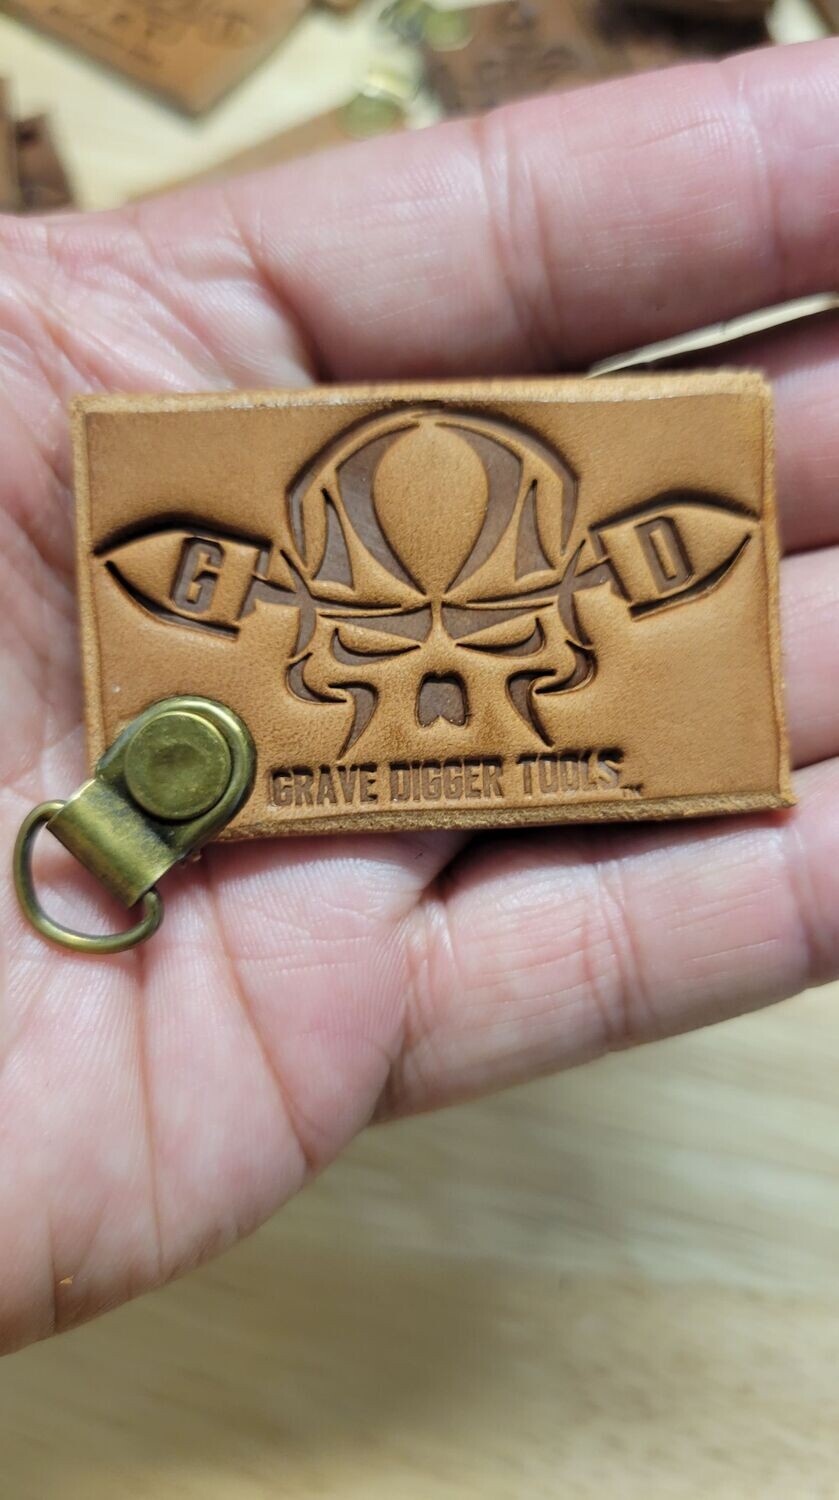 2.25" x 1.25" Grave Digger Tools Custom Leather Keychains